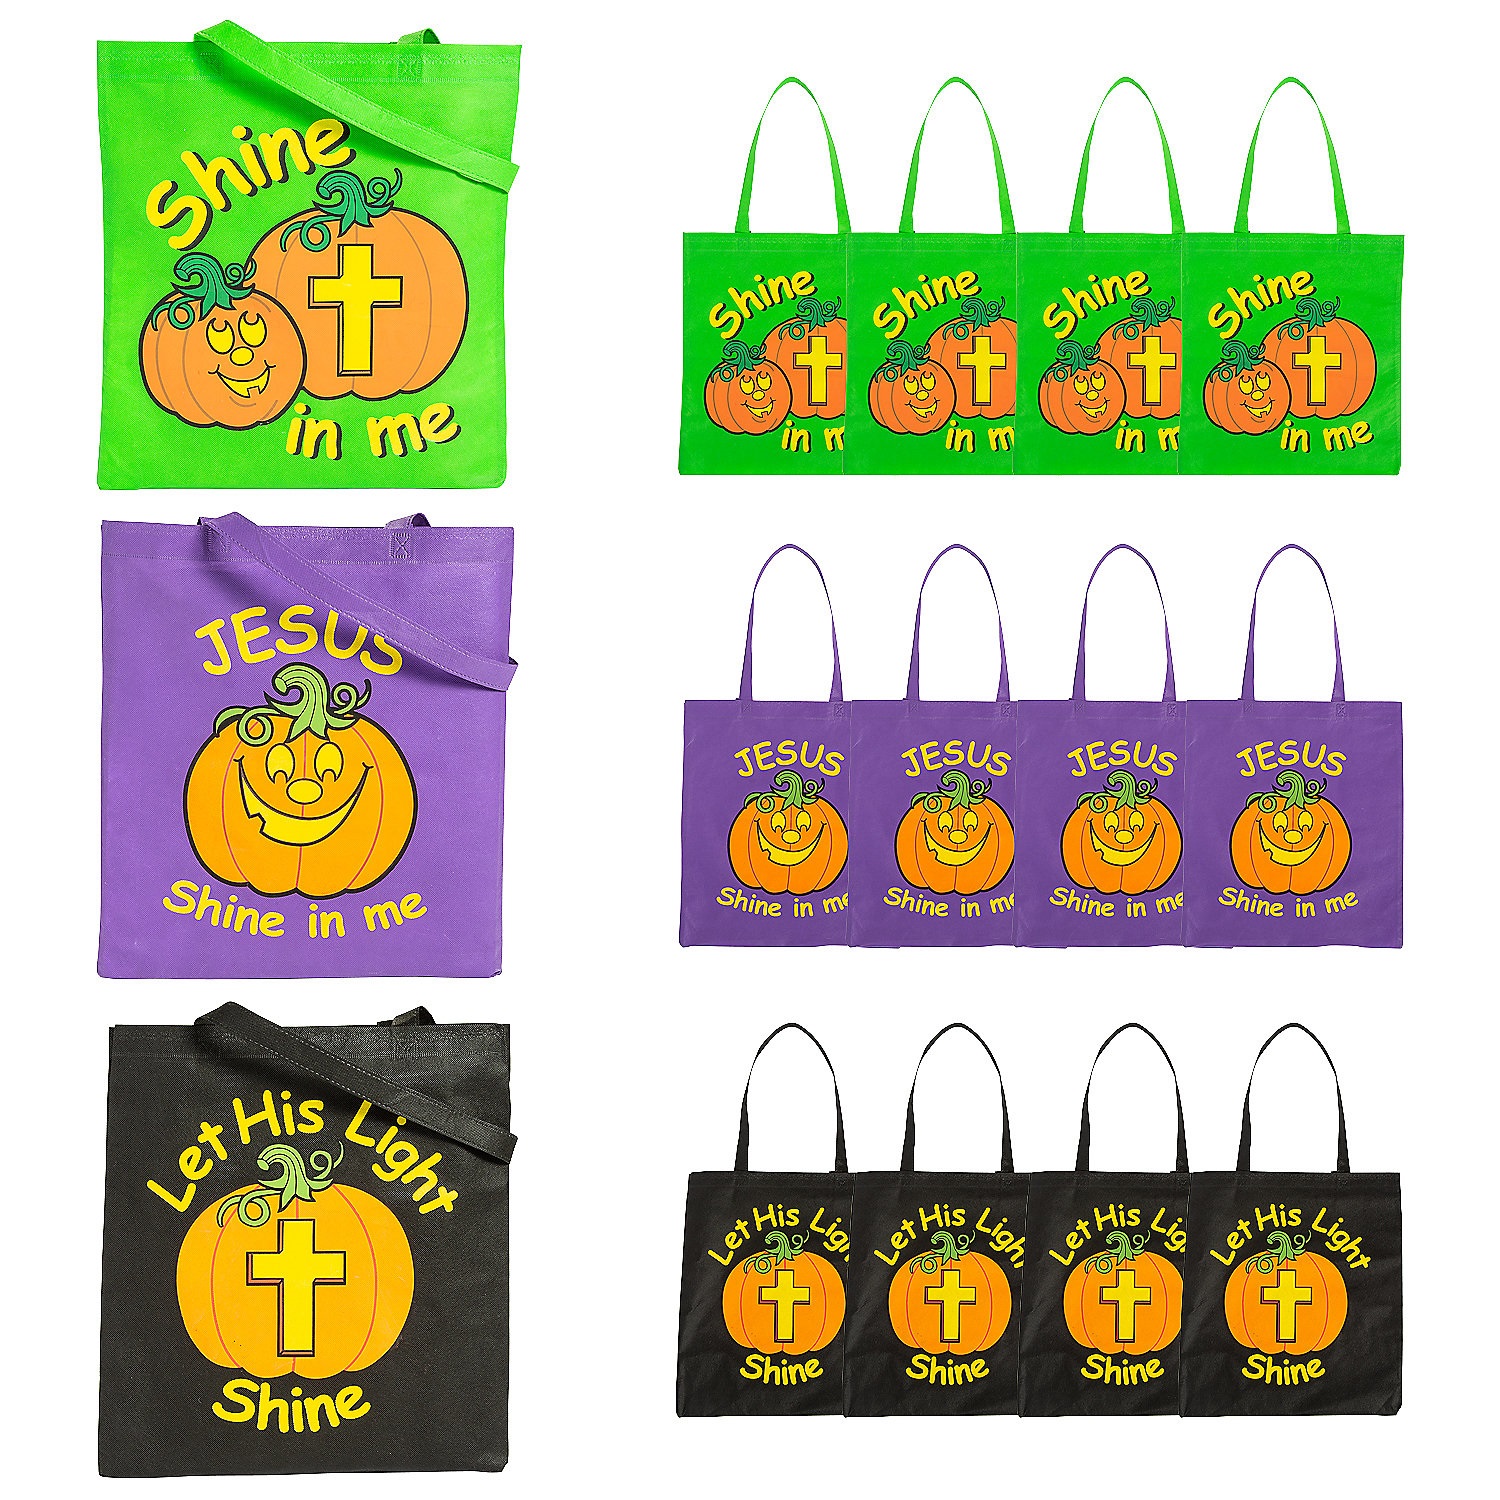 15-x-15-large-nonwoven-glow-in-the-dark-christian-pumpkin-tote-bags-12-pc-_36_2411